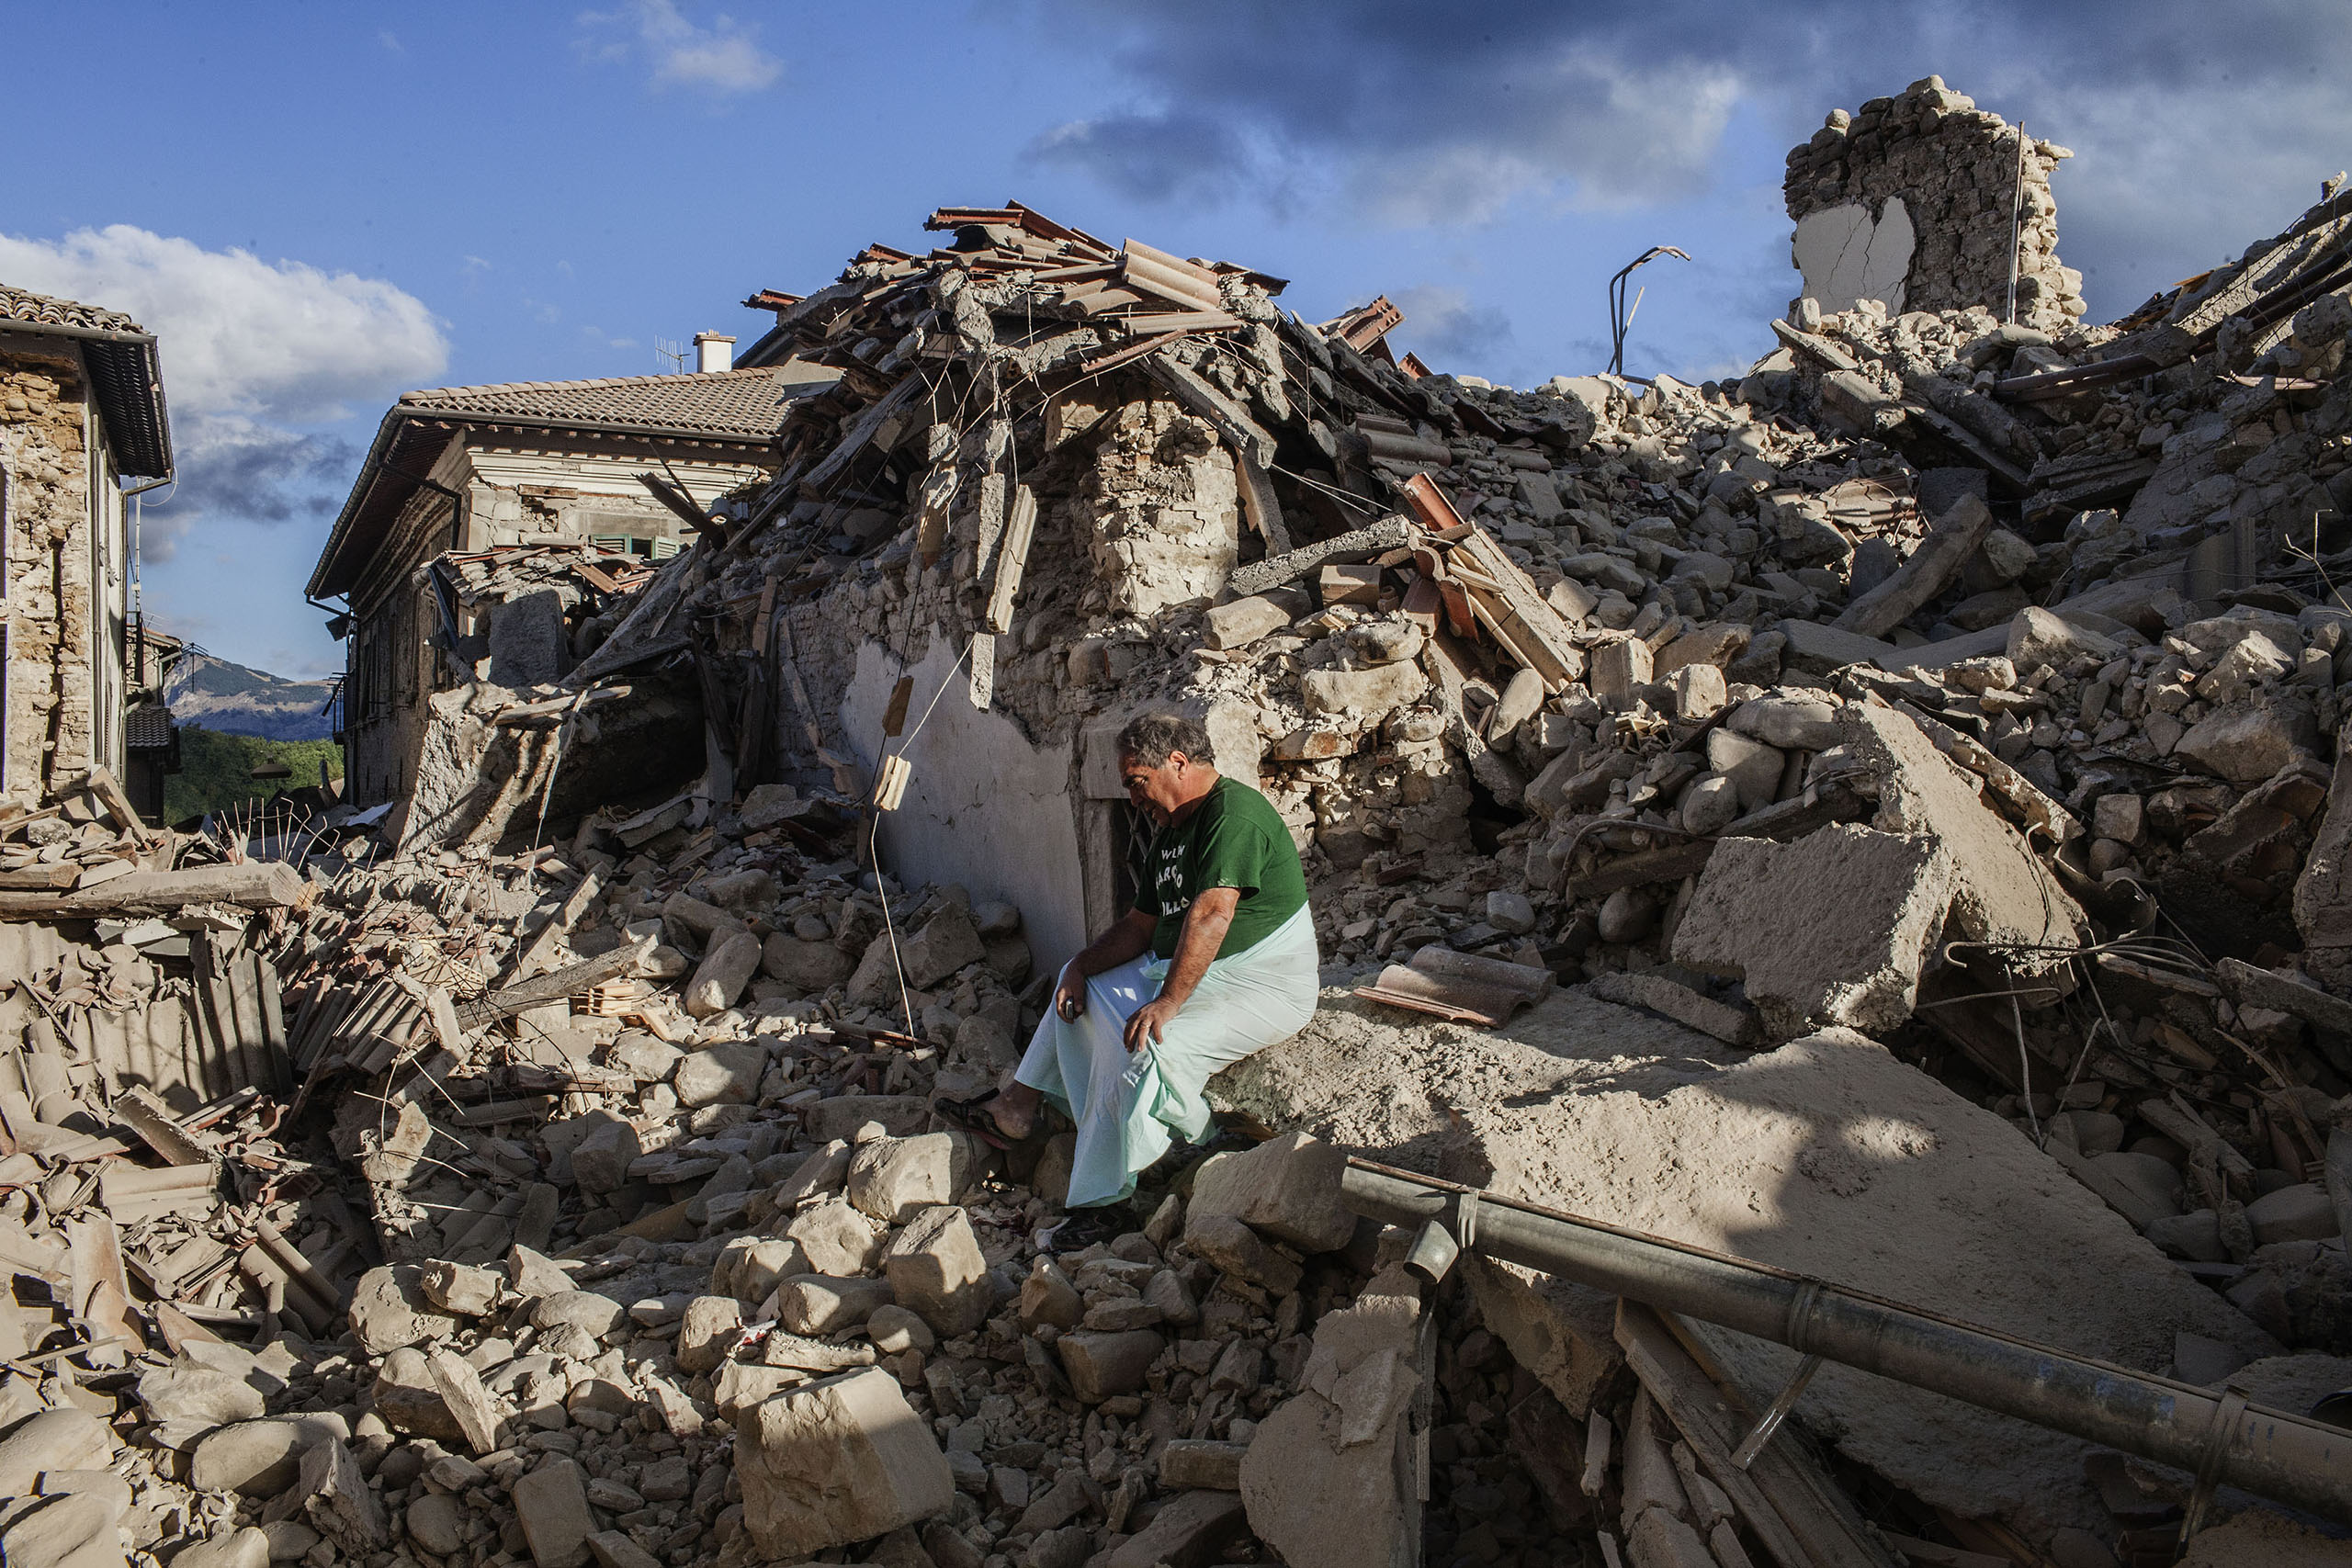 A man sits on the rubble in front of his house that was completely destroyed by the earthquake in Amatrice, Italy, on Aug. 24, 2016.